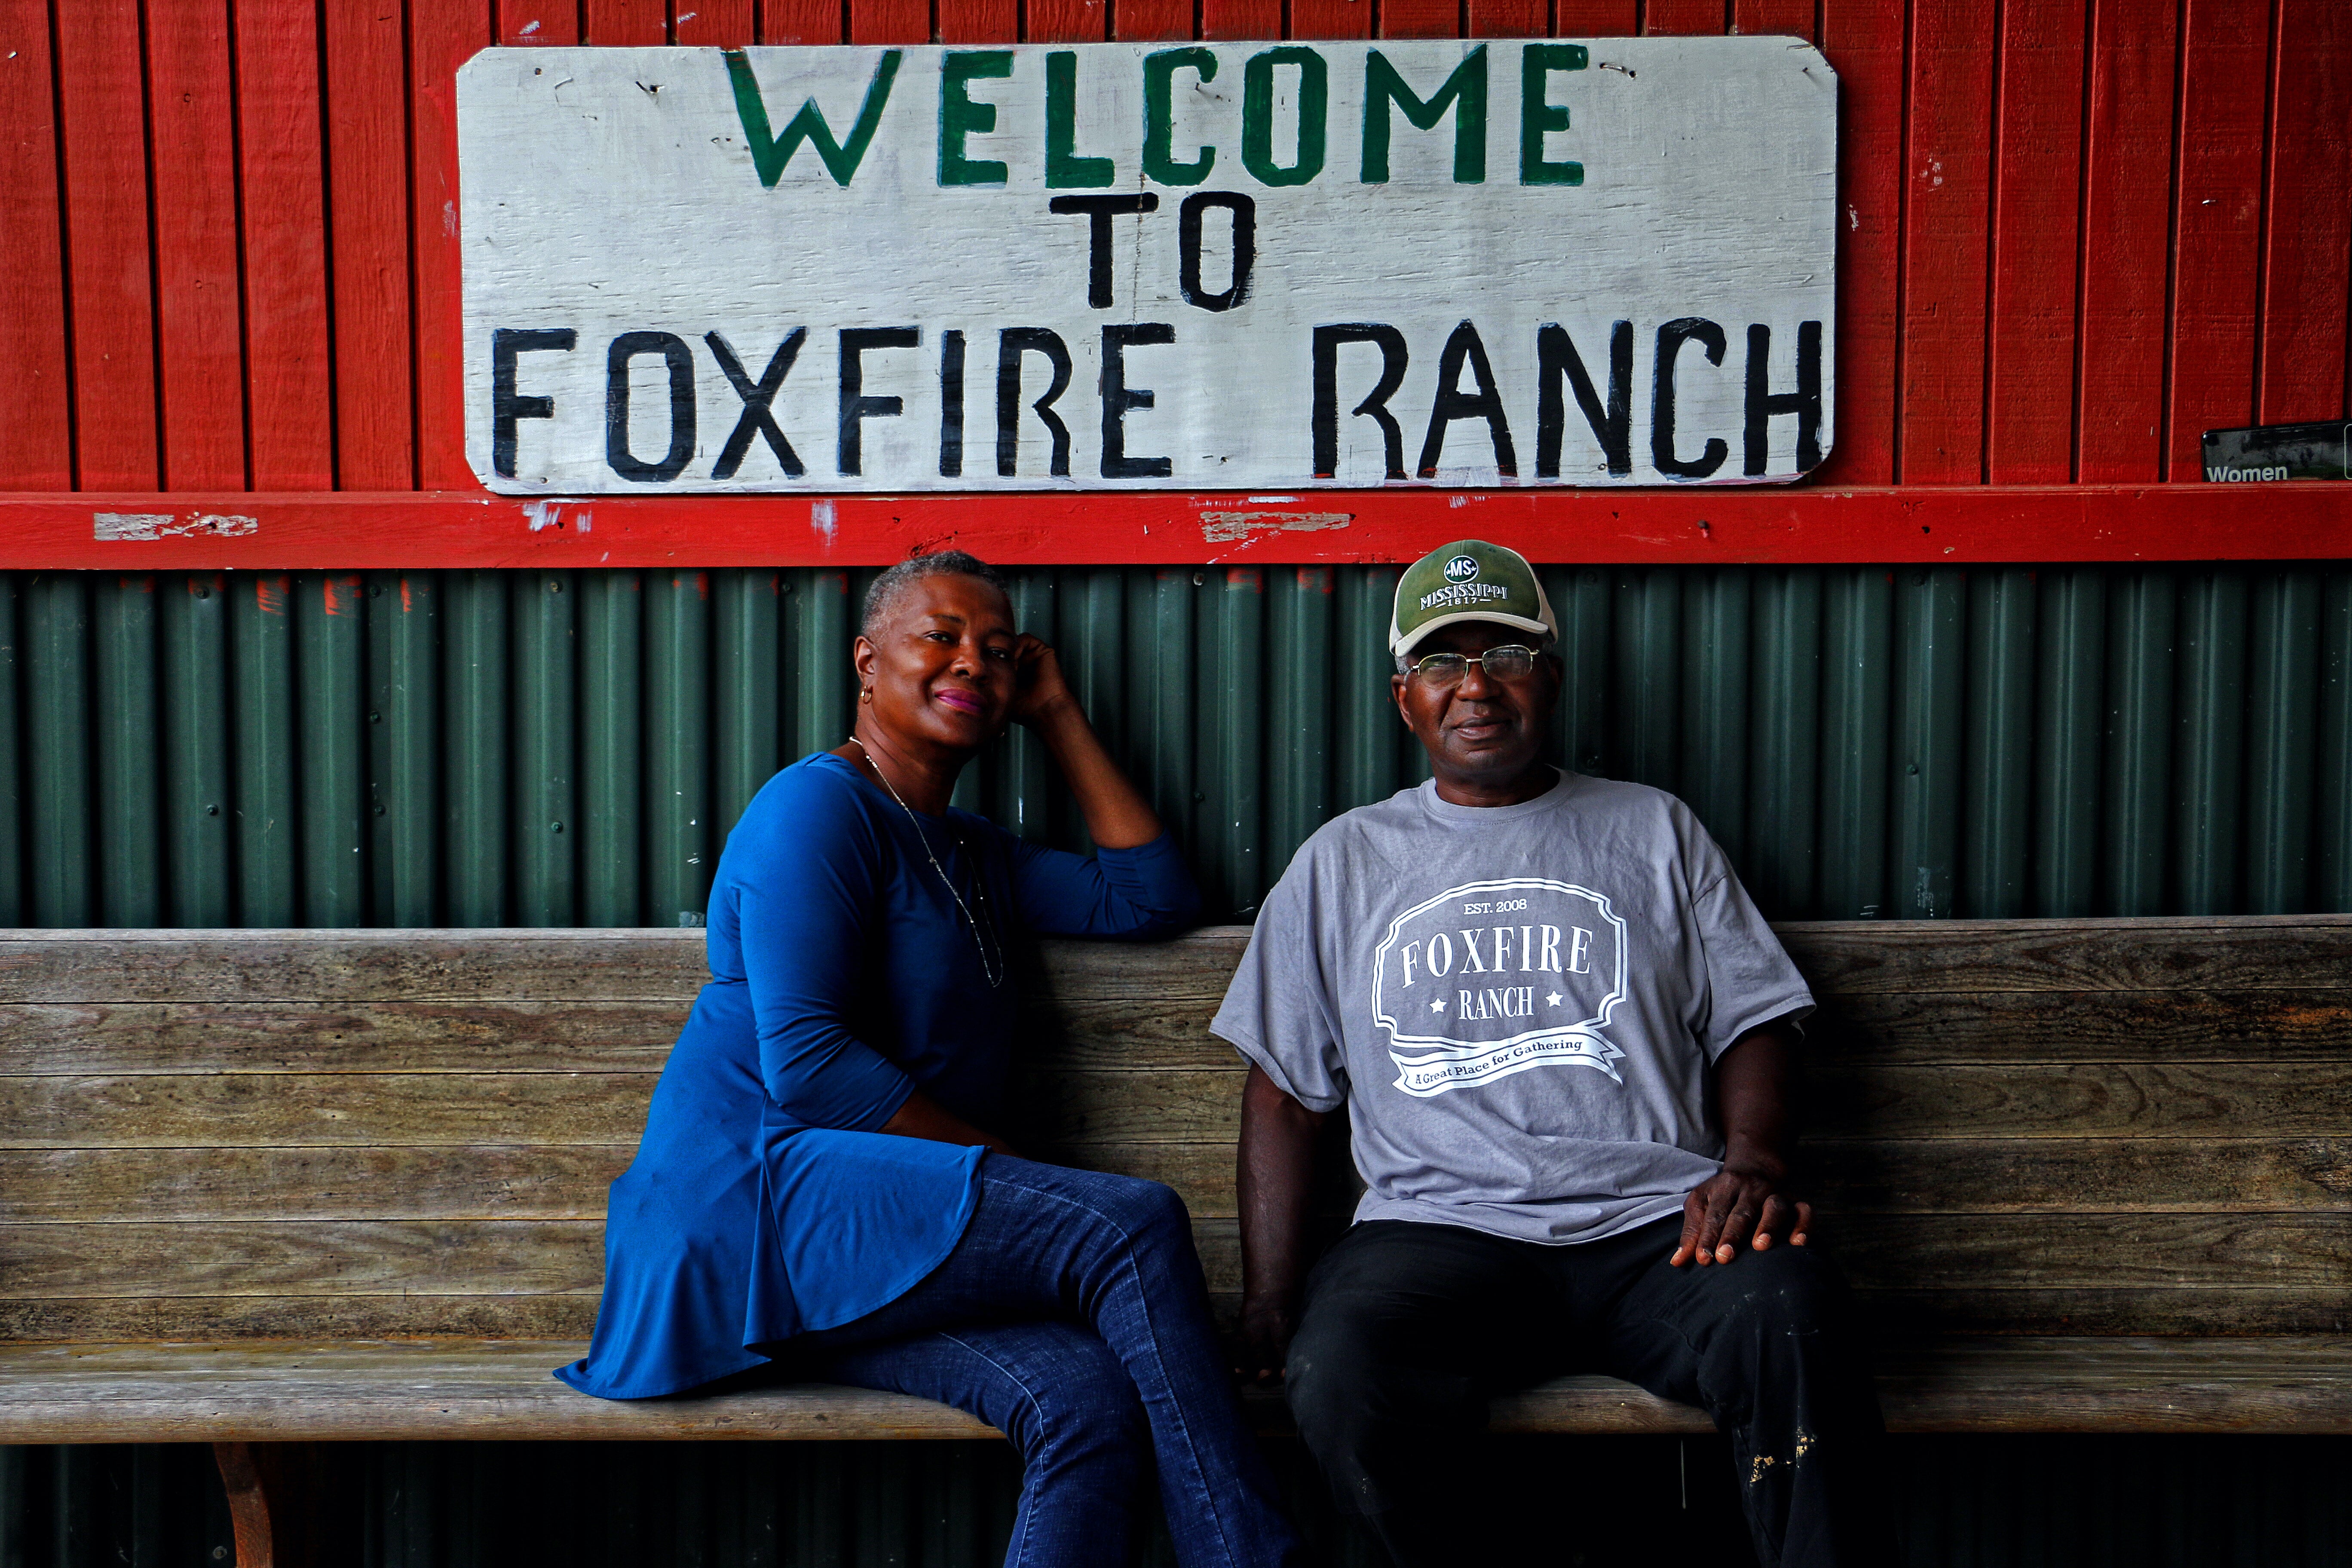 The Foxfire Ranch Tradition- “Where Southern Roots Sprout from Old to Youth”